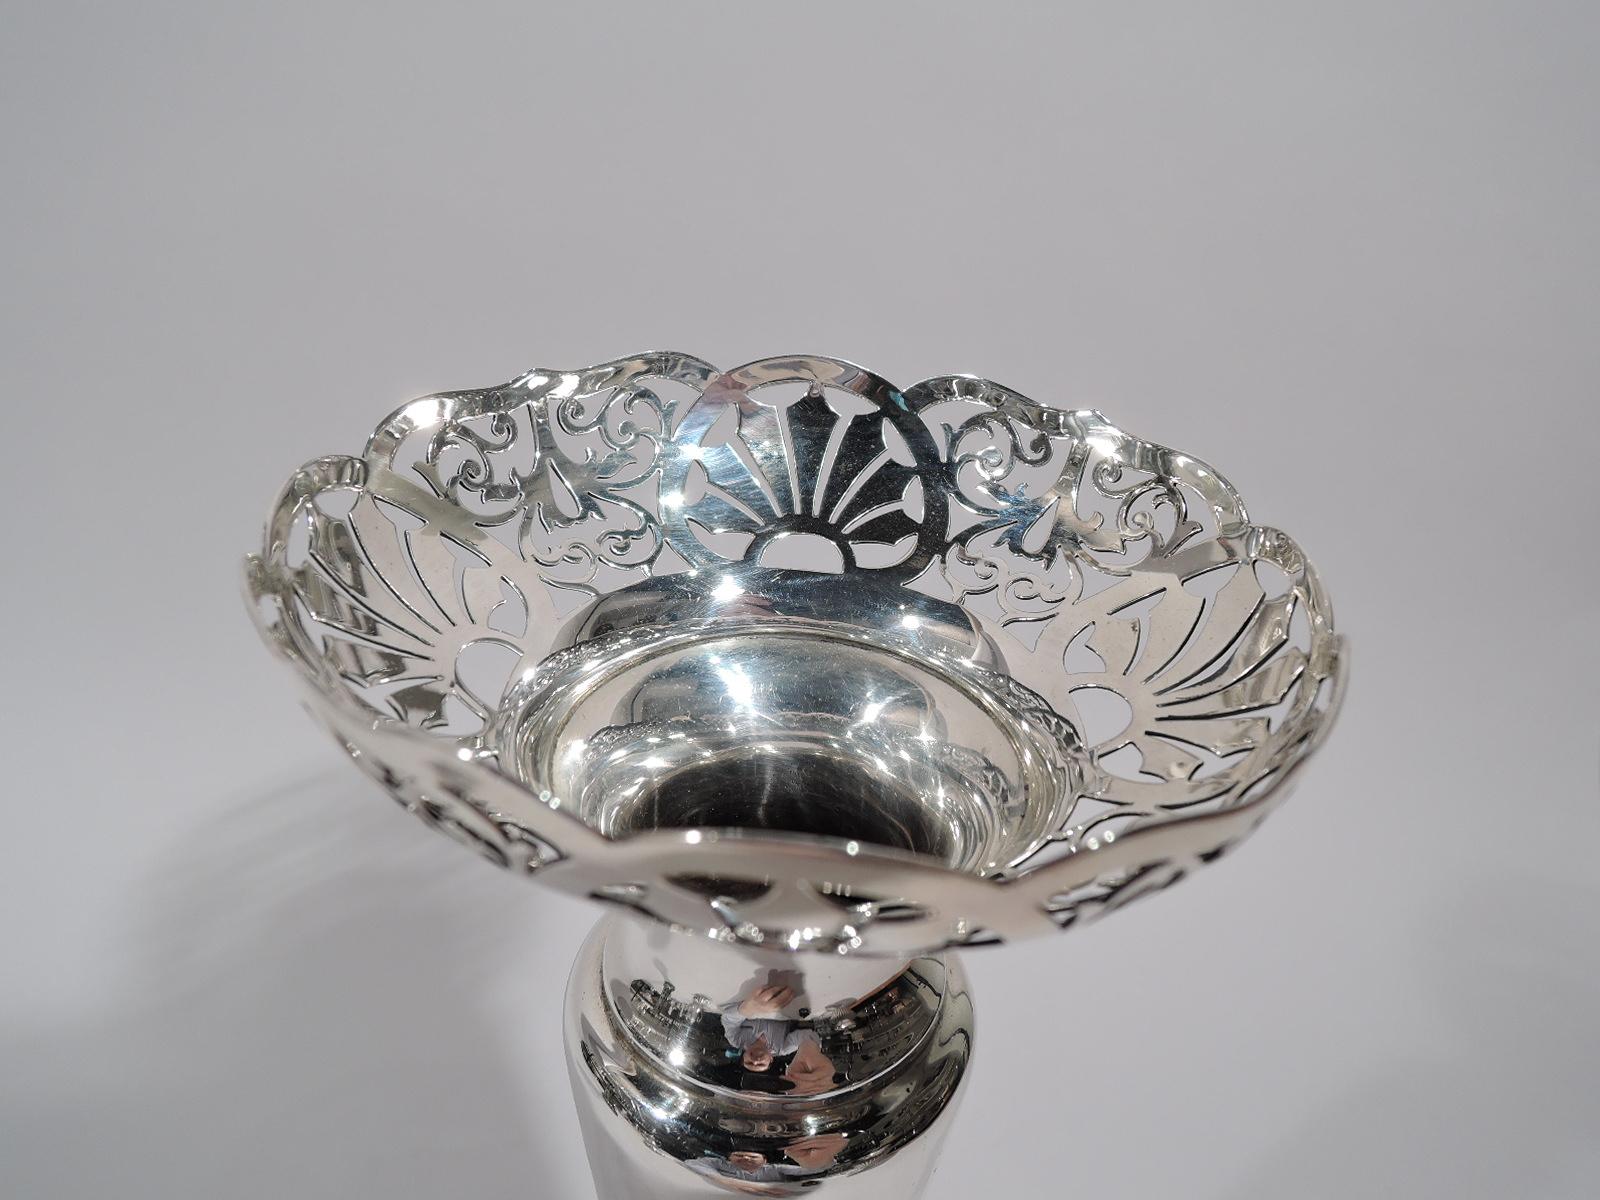 Edward VIII sterling silver vase. Made by Walker & Hall in Sheffield in 1936. Narrow and tapering body with base knop on gently raised and round foot. Spool neck and hemispheric rim with pierced scallop shells and scrollwork. Fully marked. Weighted.